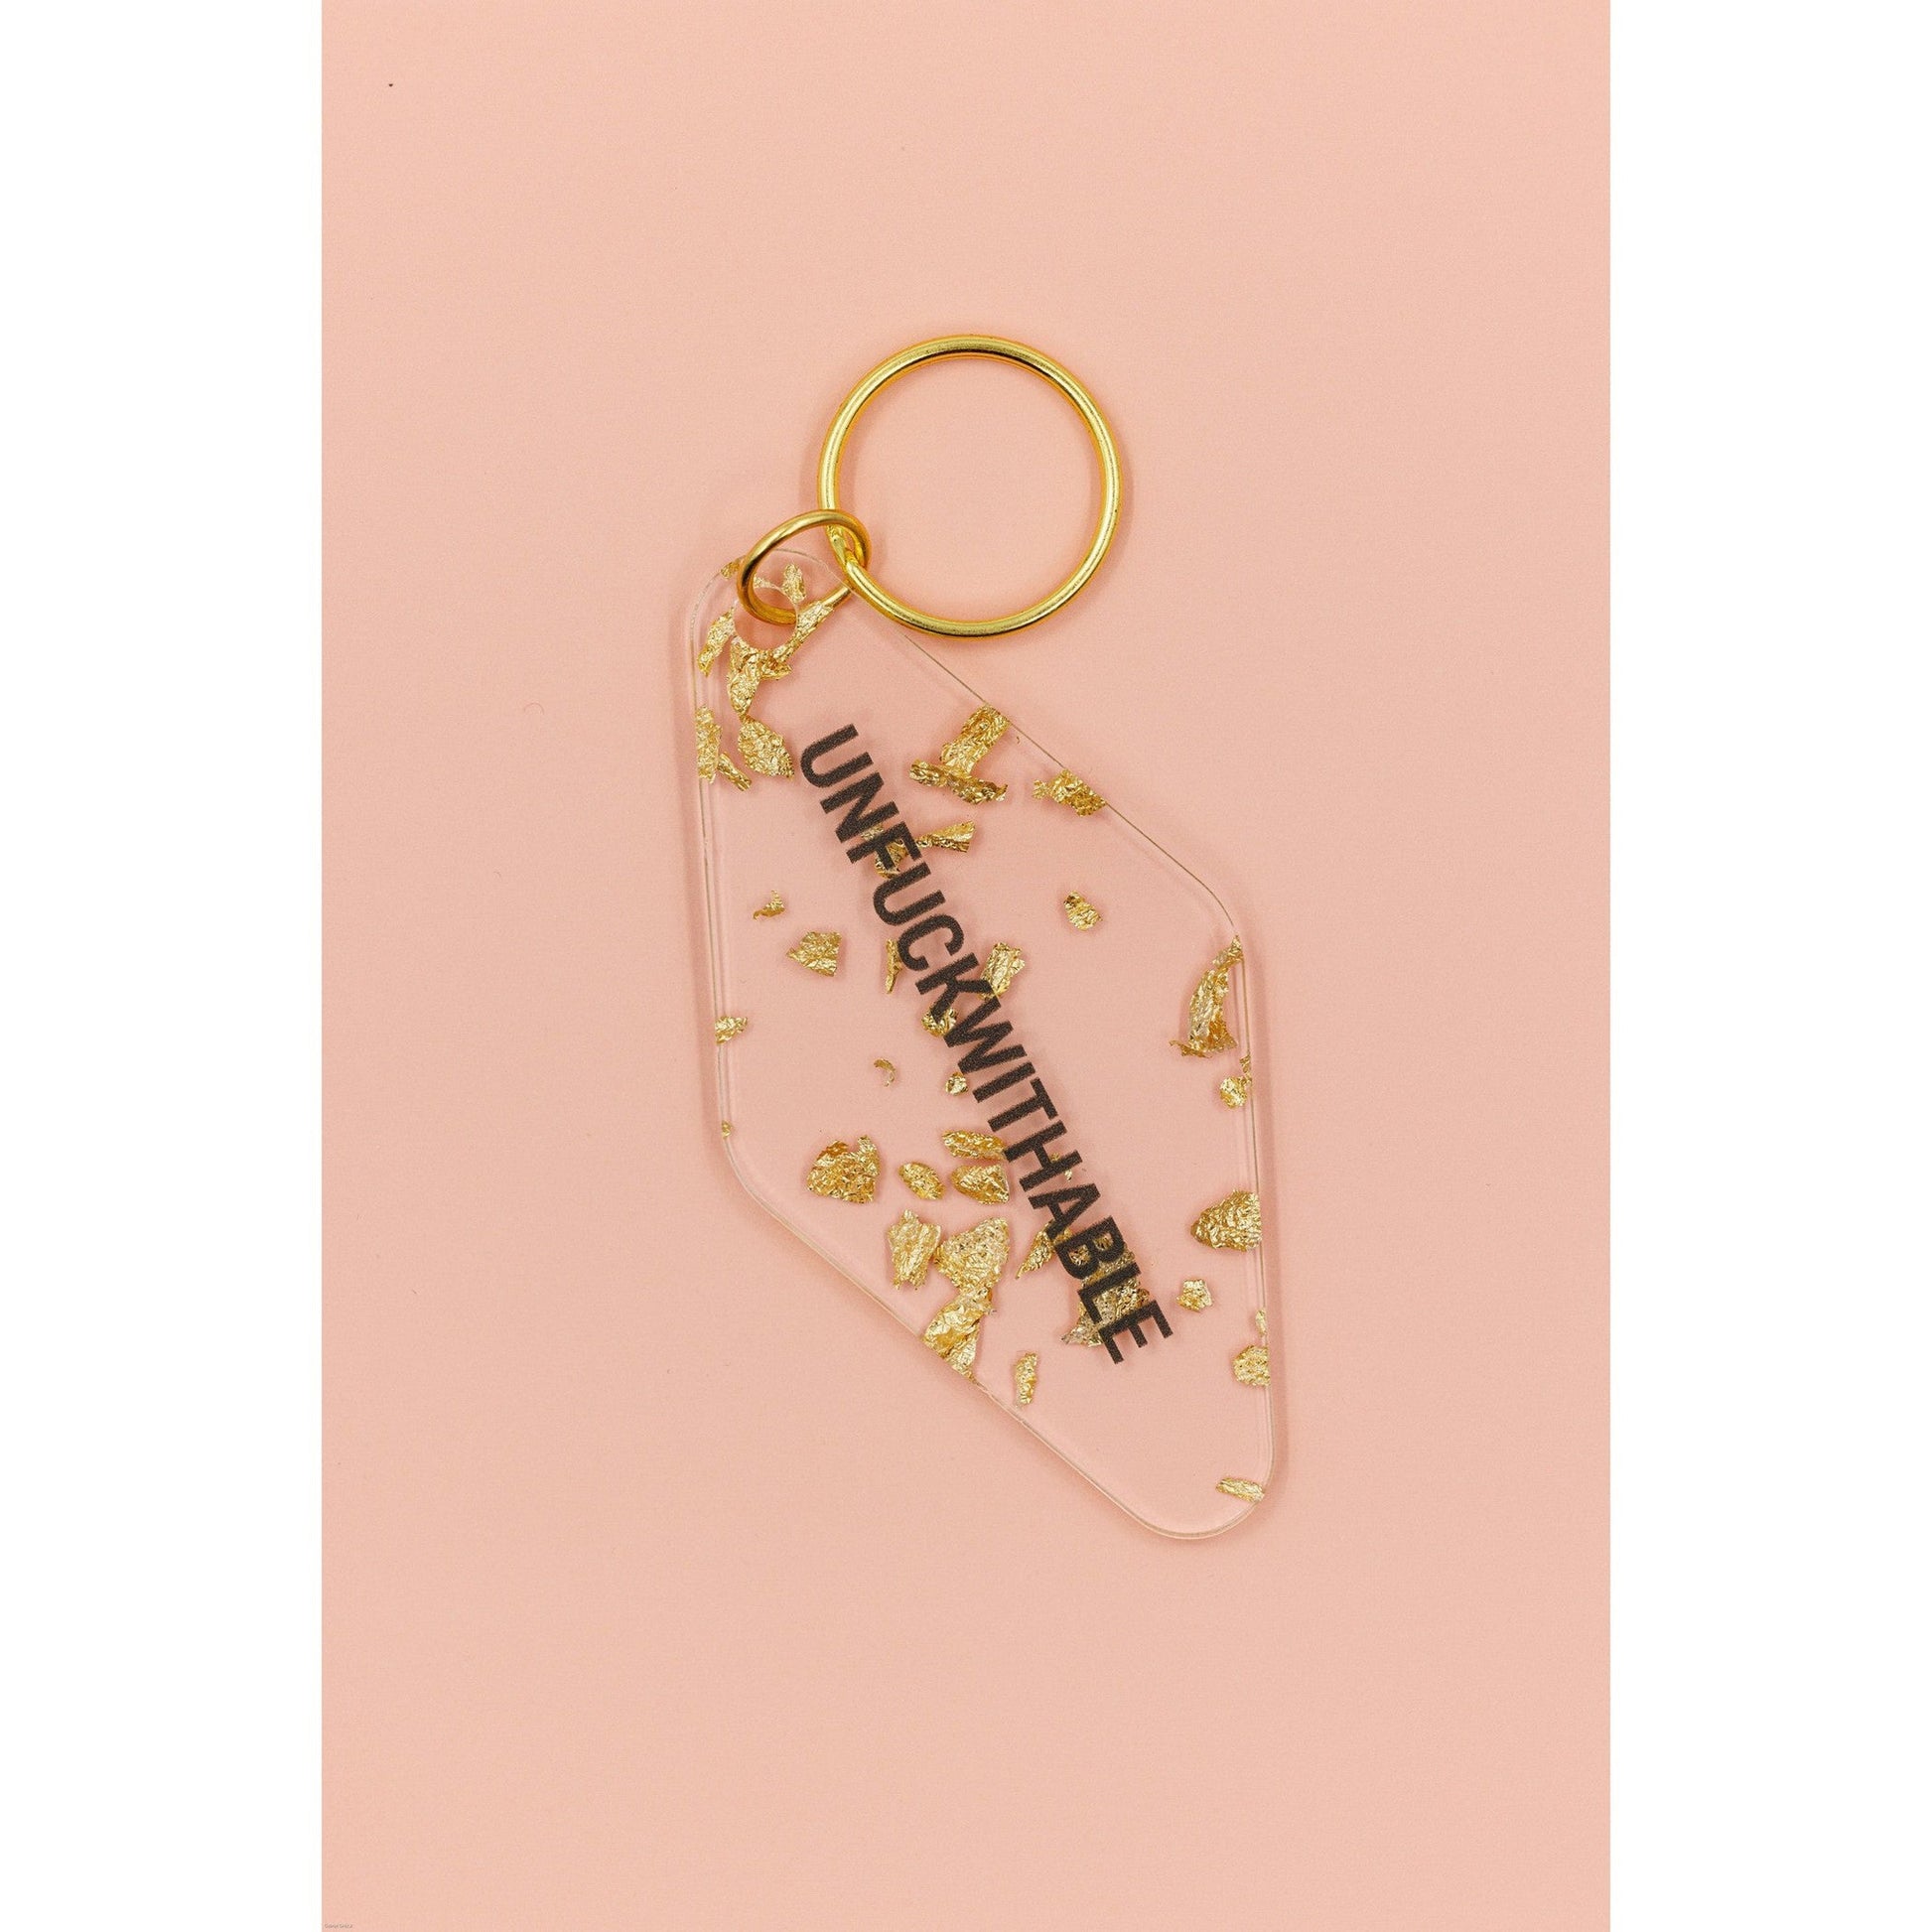 UNFUCKWITHABLE Motel Style Key Tag Keychain in Clear with Gold Leaf